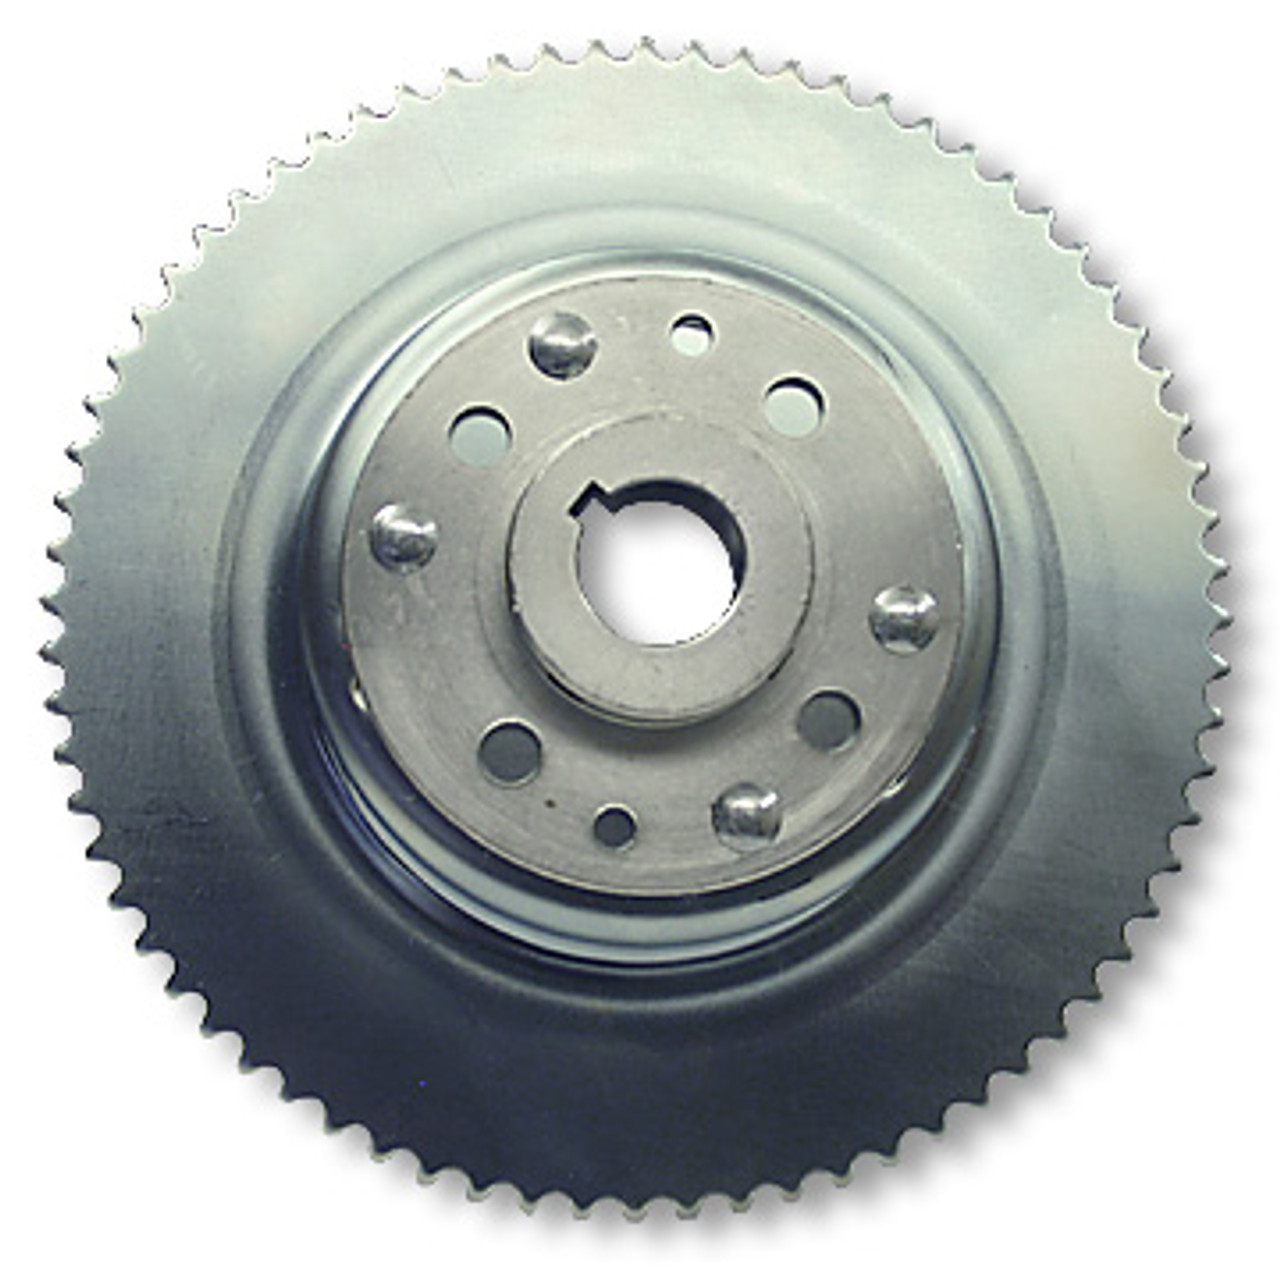 72 Tooth Sprocket For #35 Chain & 4-1/2" Brake Drum, Machined OD (One Piece) Riveted To Mini-Hub, 1" Bore